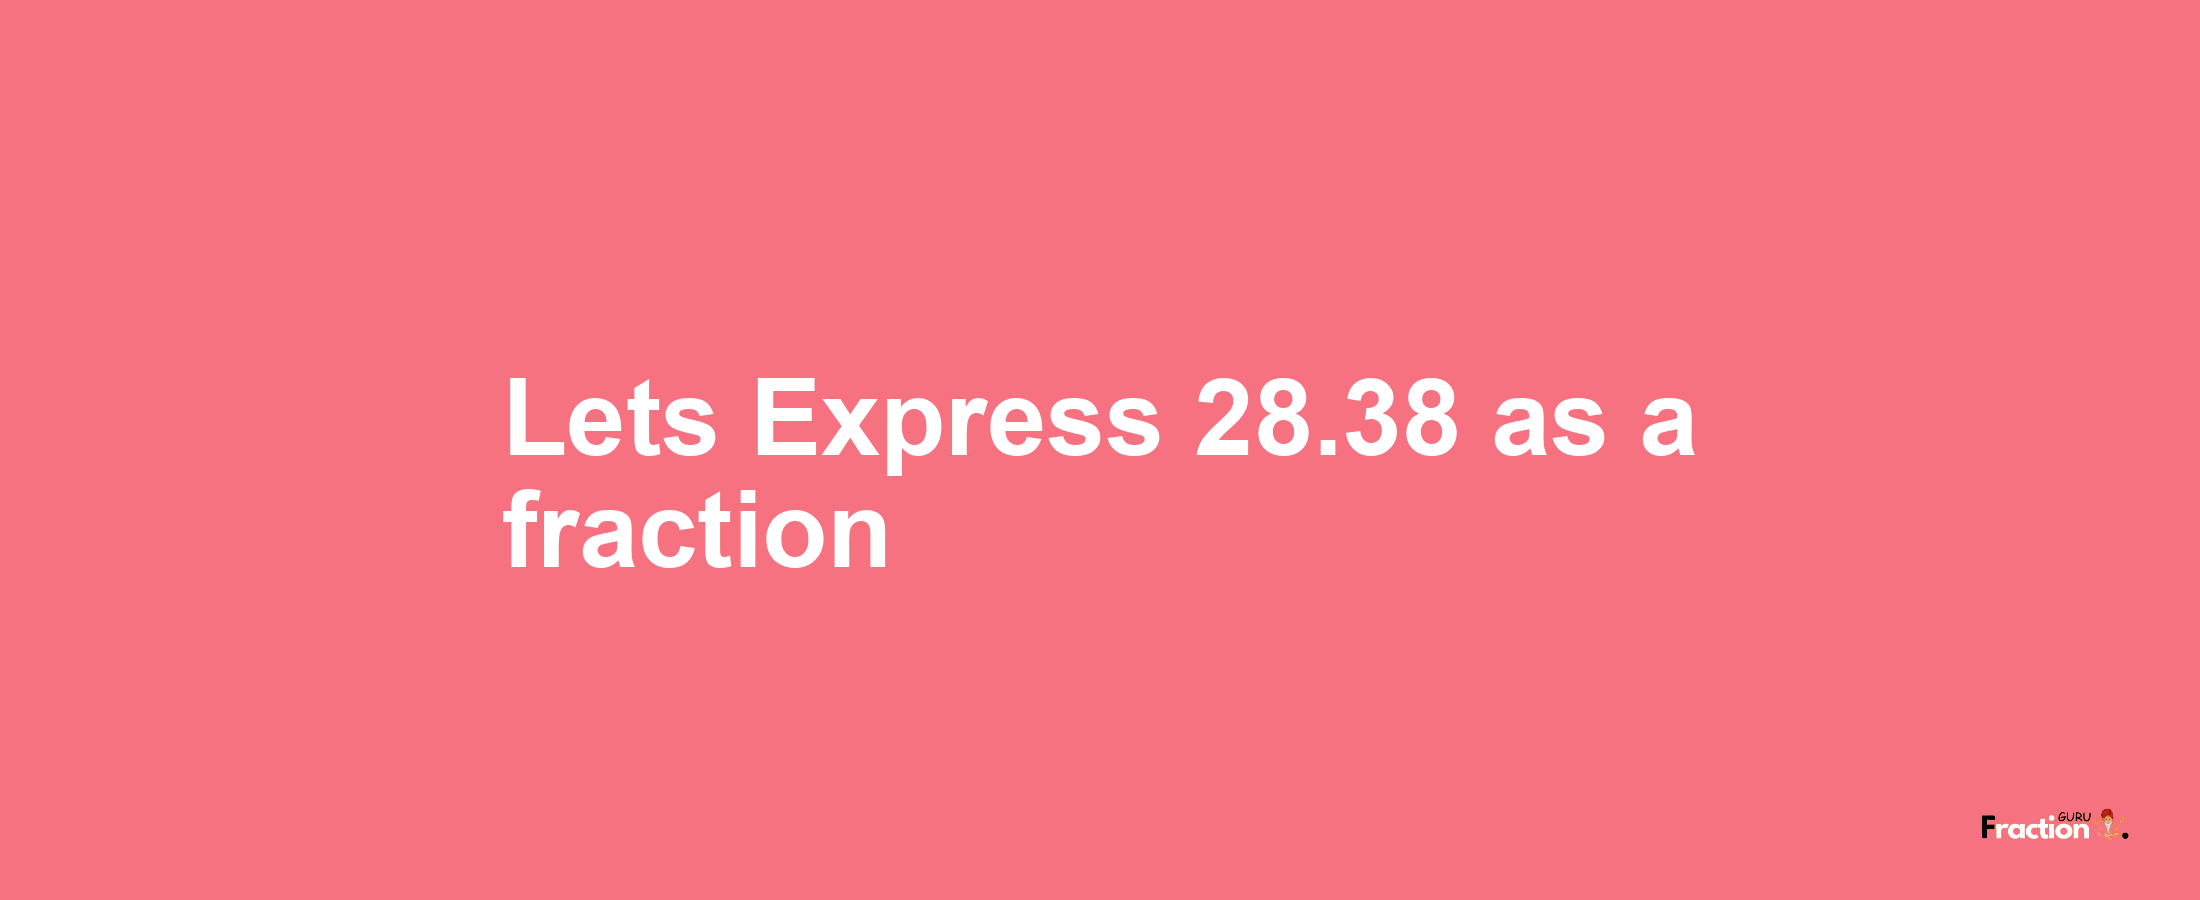 Lets Express 28.38 as afraction